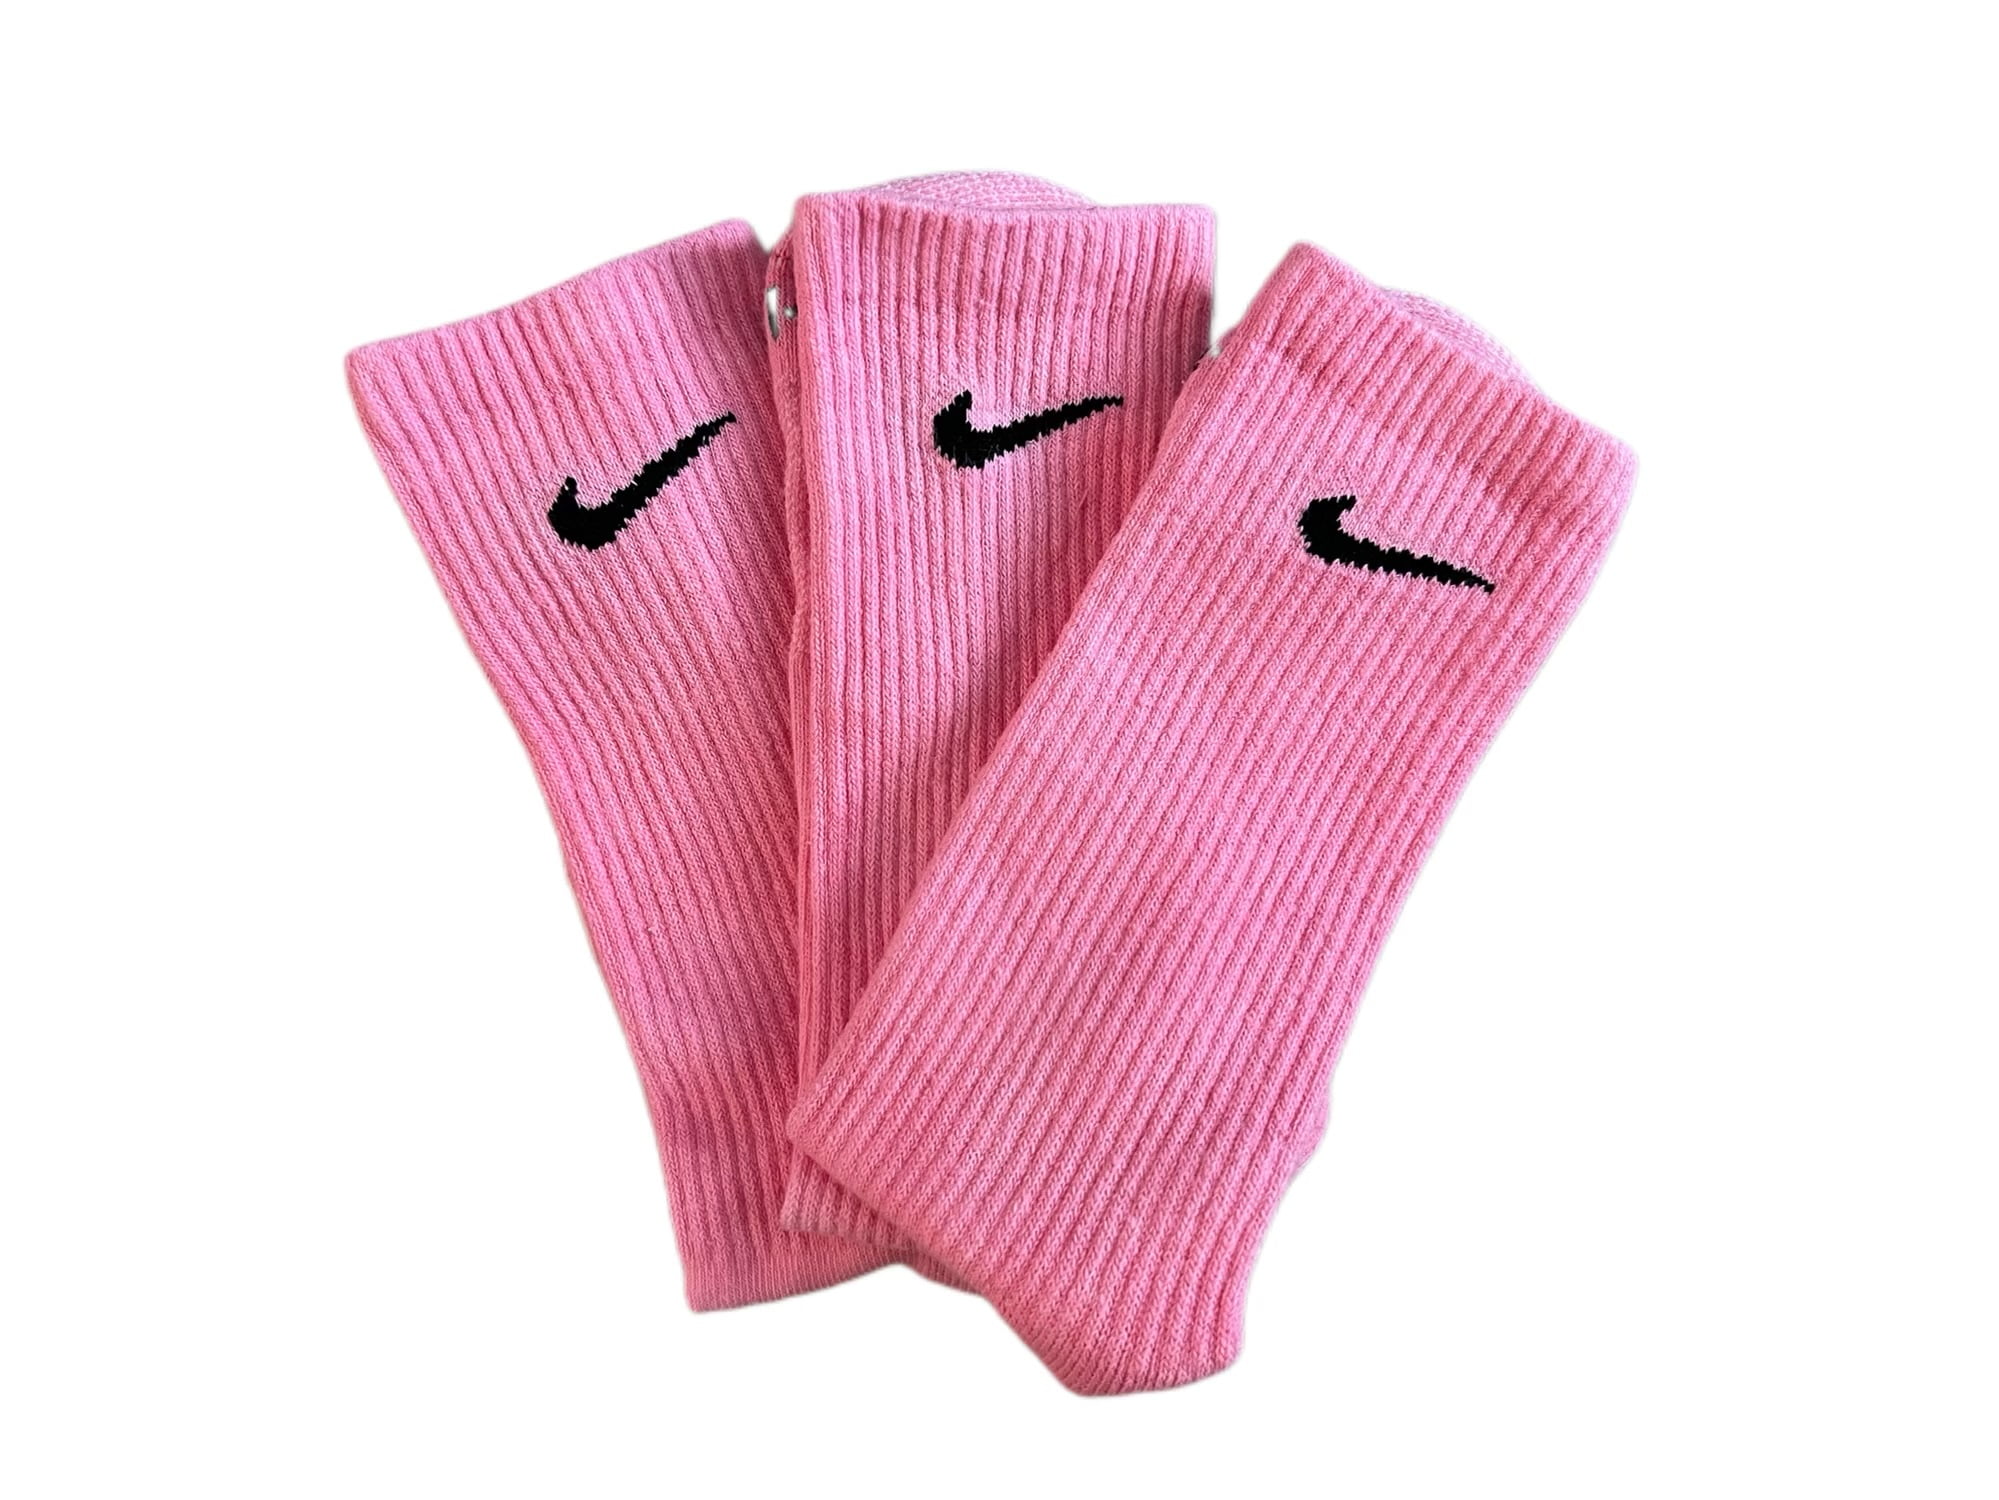 Pack Socks Large, Pack Adult Fit, Unisex Pink - Nike Crew Punch 3 Dri